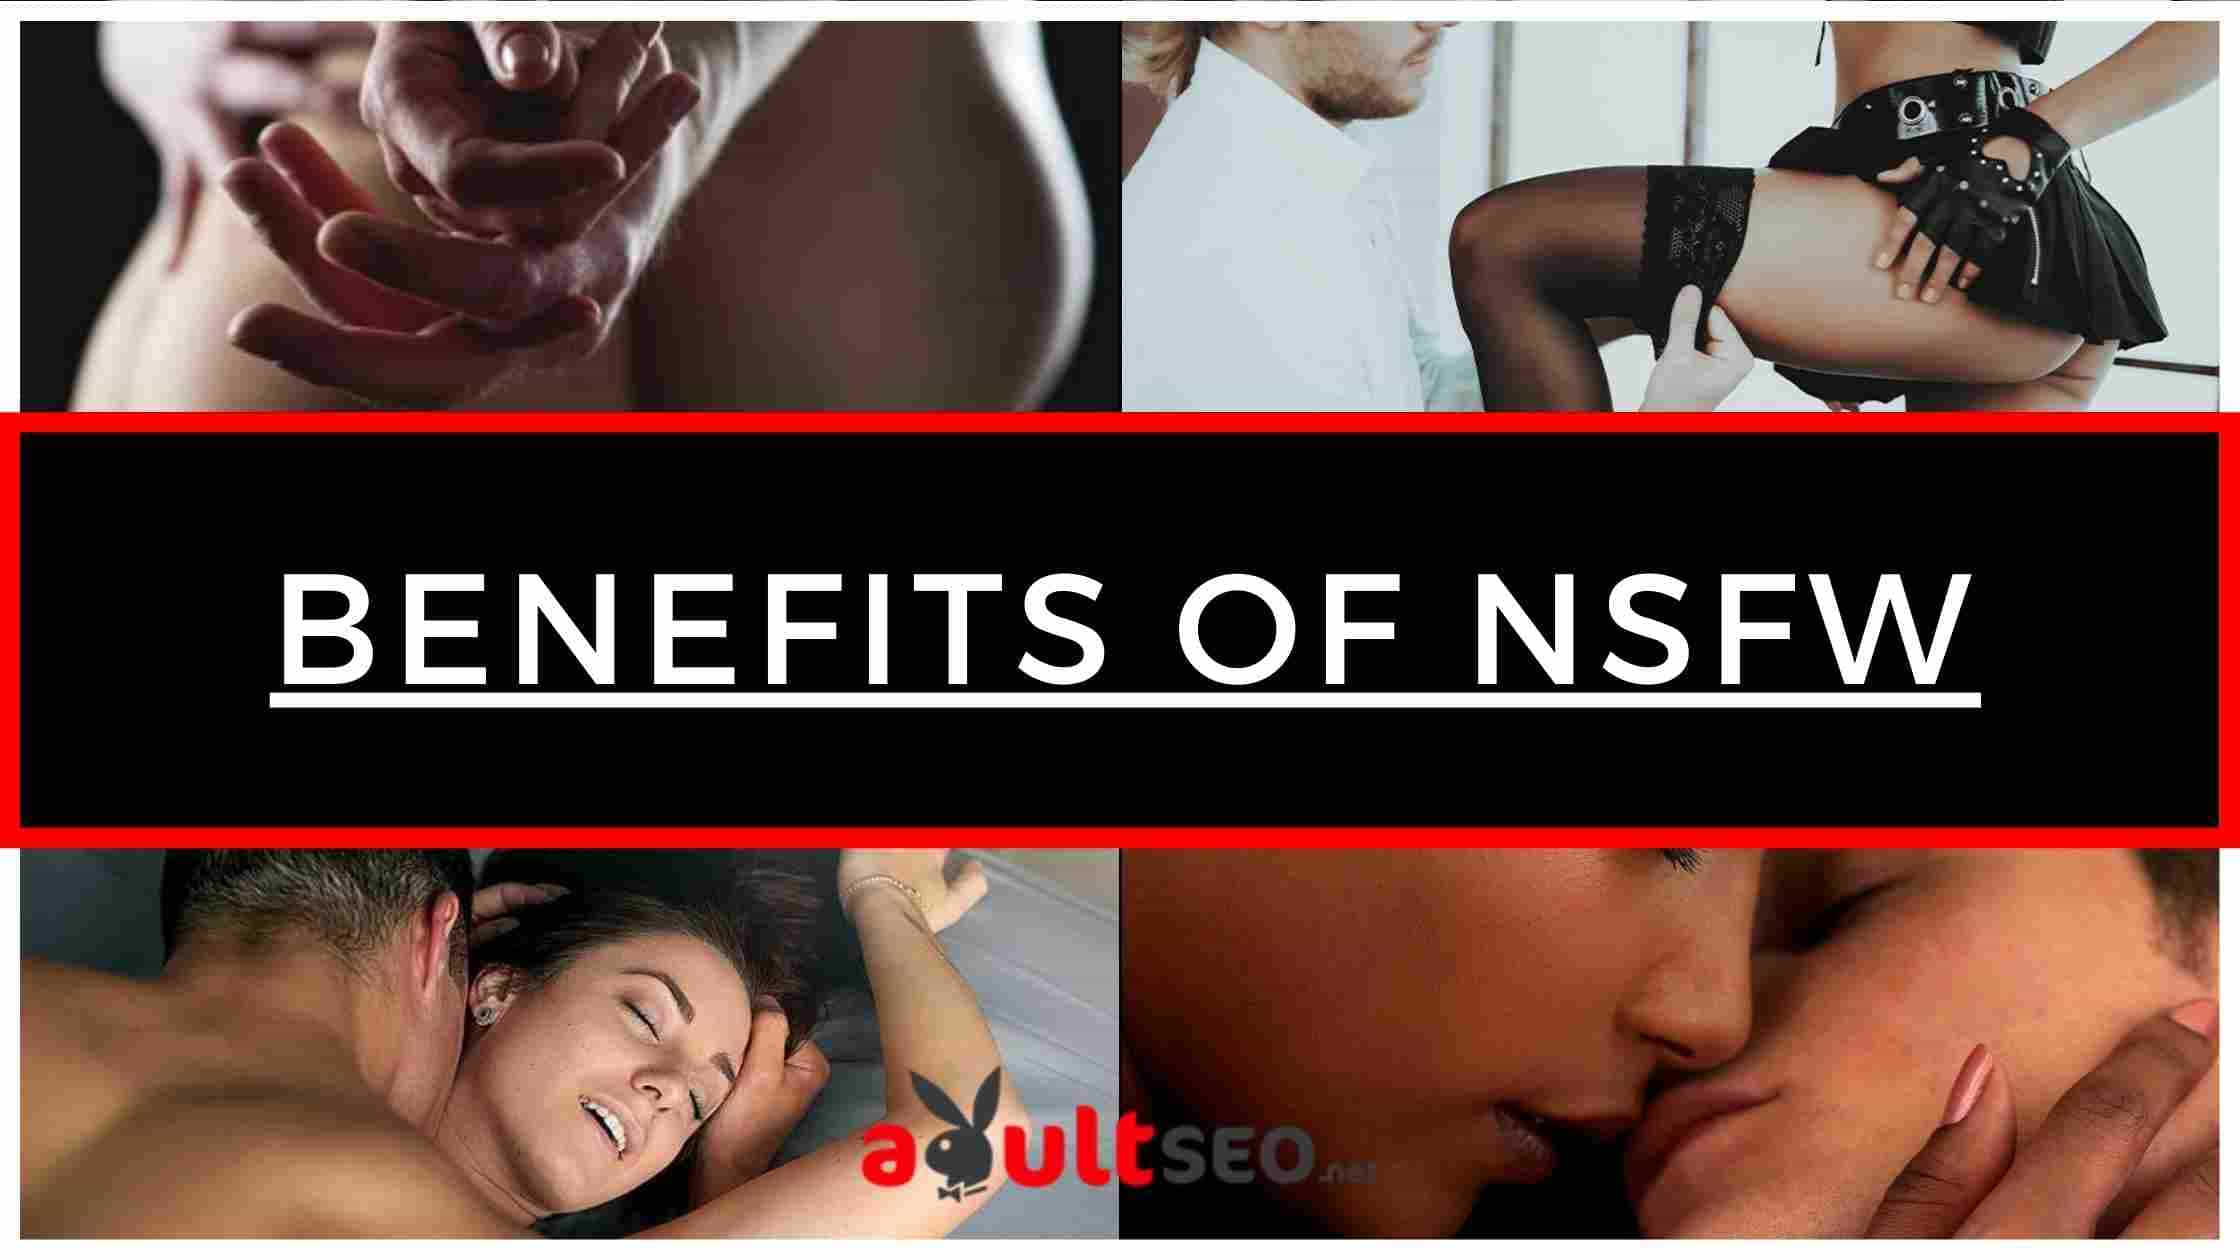 Unexpected Benefits Of NSFW to Adult Entertainment Industry